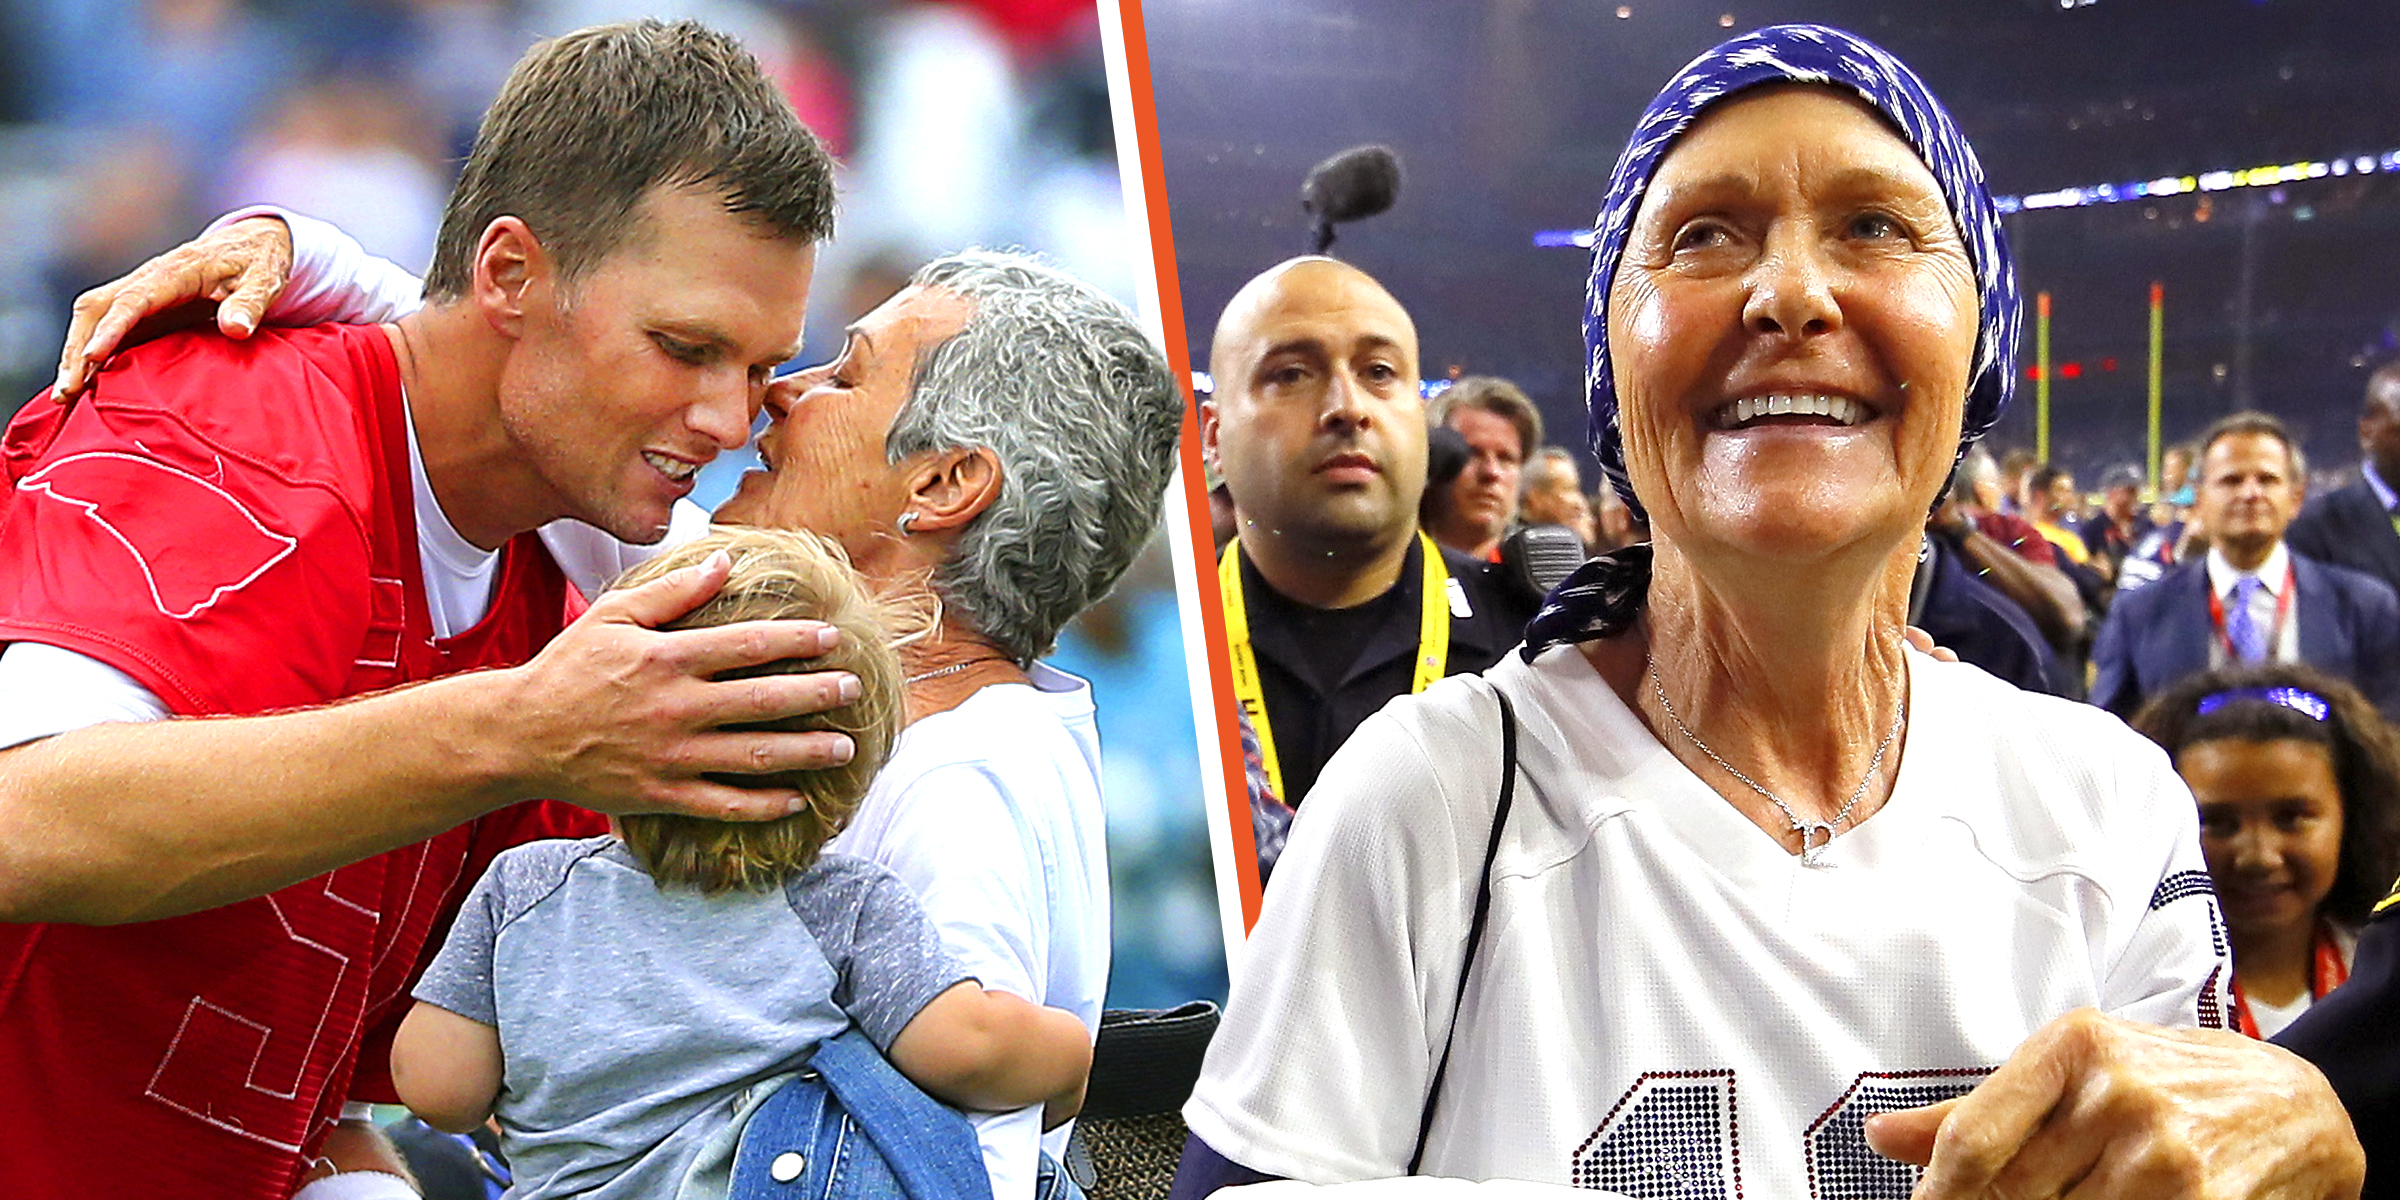 Tom Brady with his mother and nephew | Tom Brady's mother | Source: Getty Images